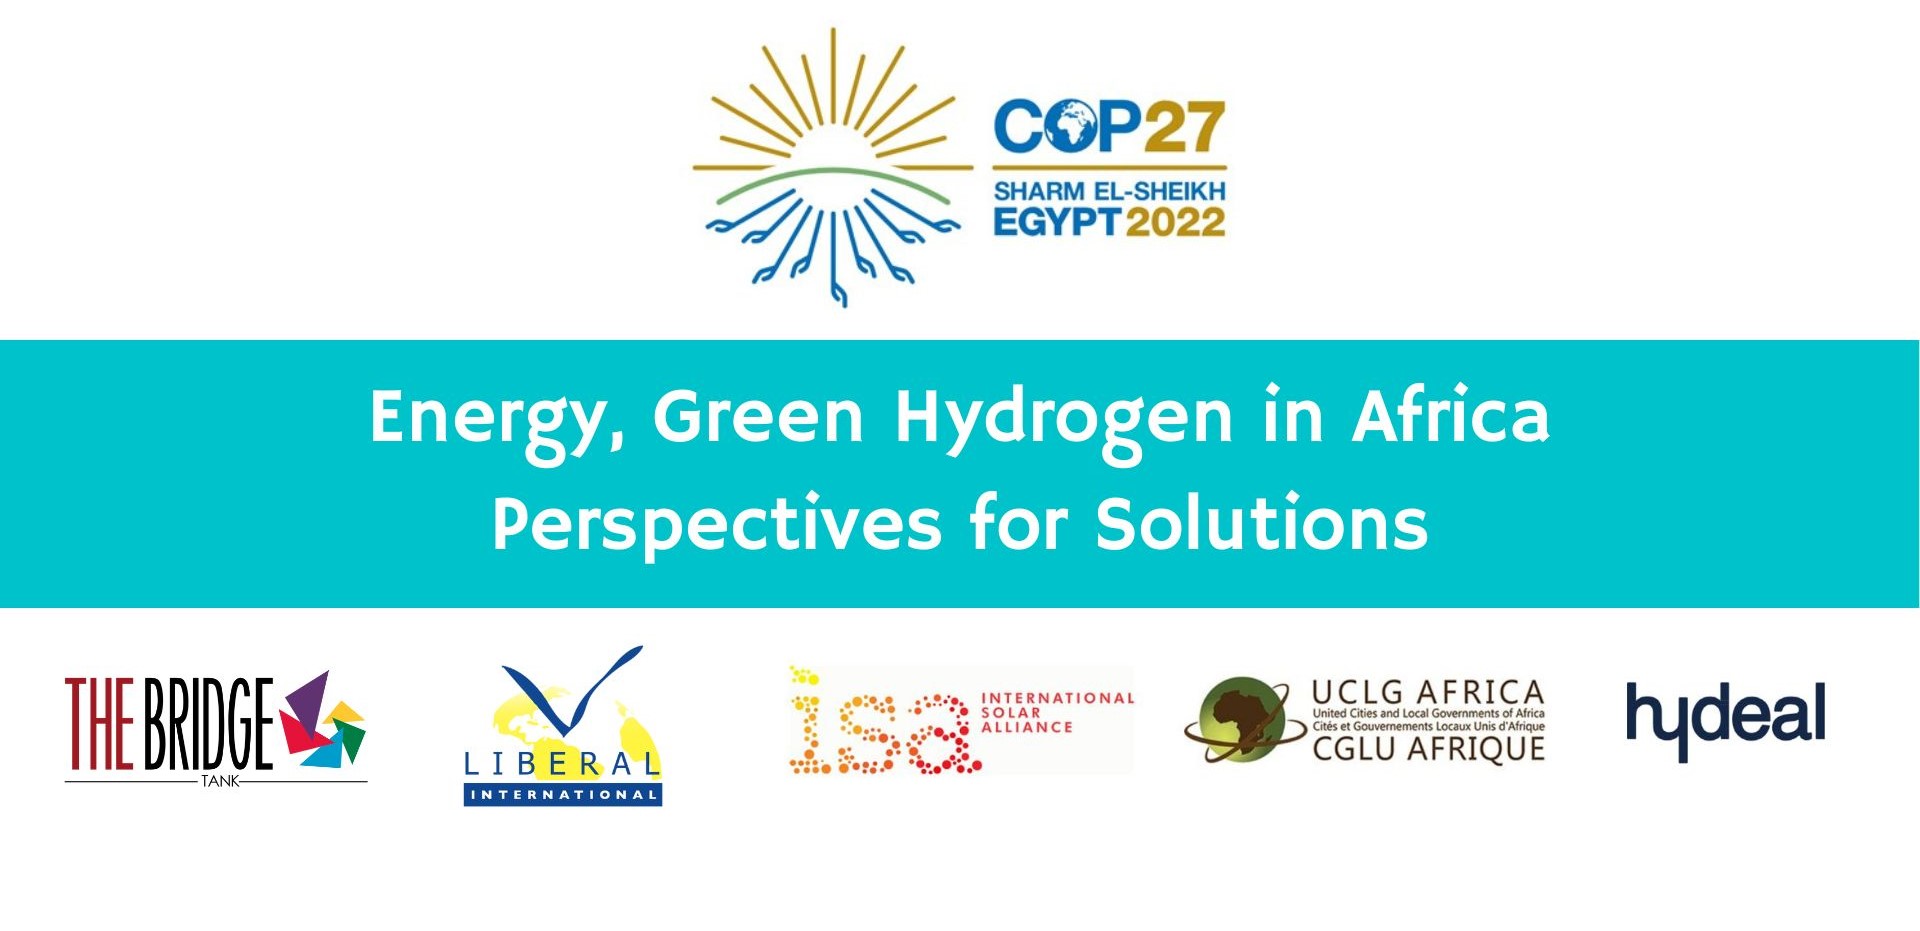 The Bridge Tank continues its involvement on hydrogen at COP 27 through a high-level panel on African Green Hydrogen Hubs